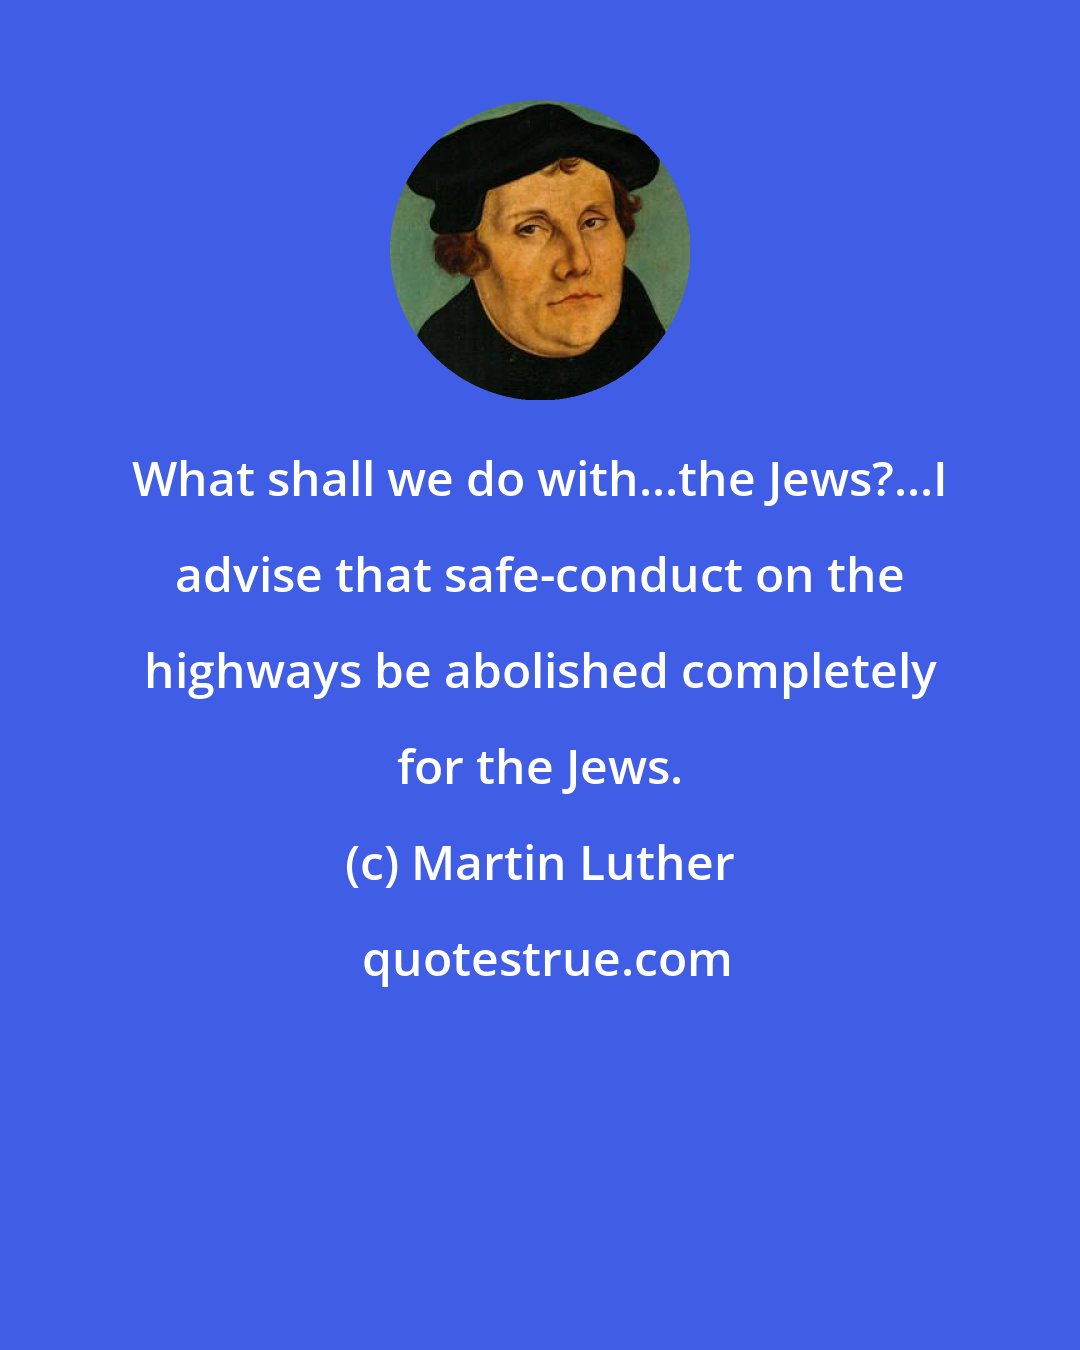 Martin Luther: What shall we do with...the Jews?...I advise that safe-conduct on the highways be abolished completely for the Jews.